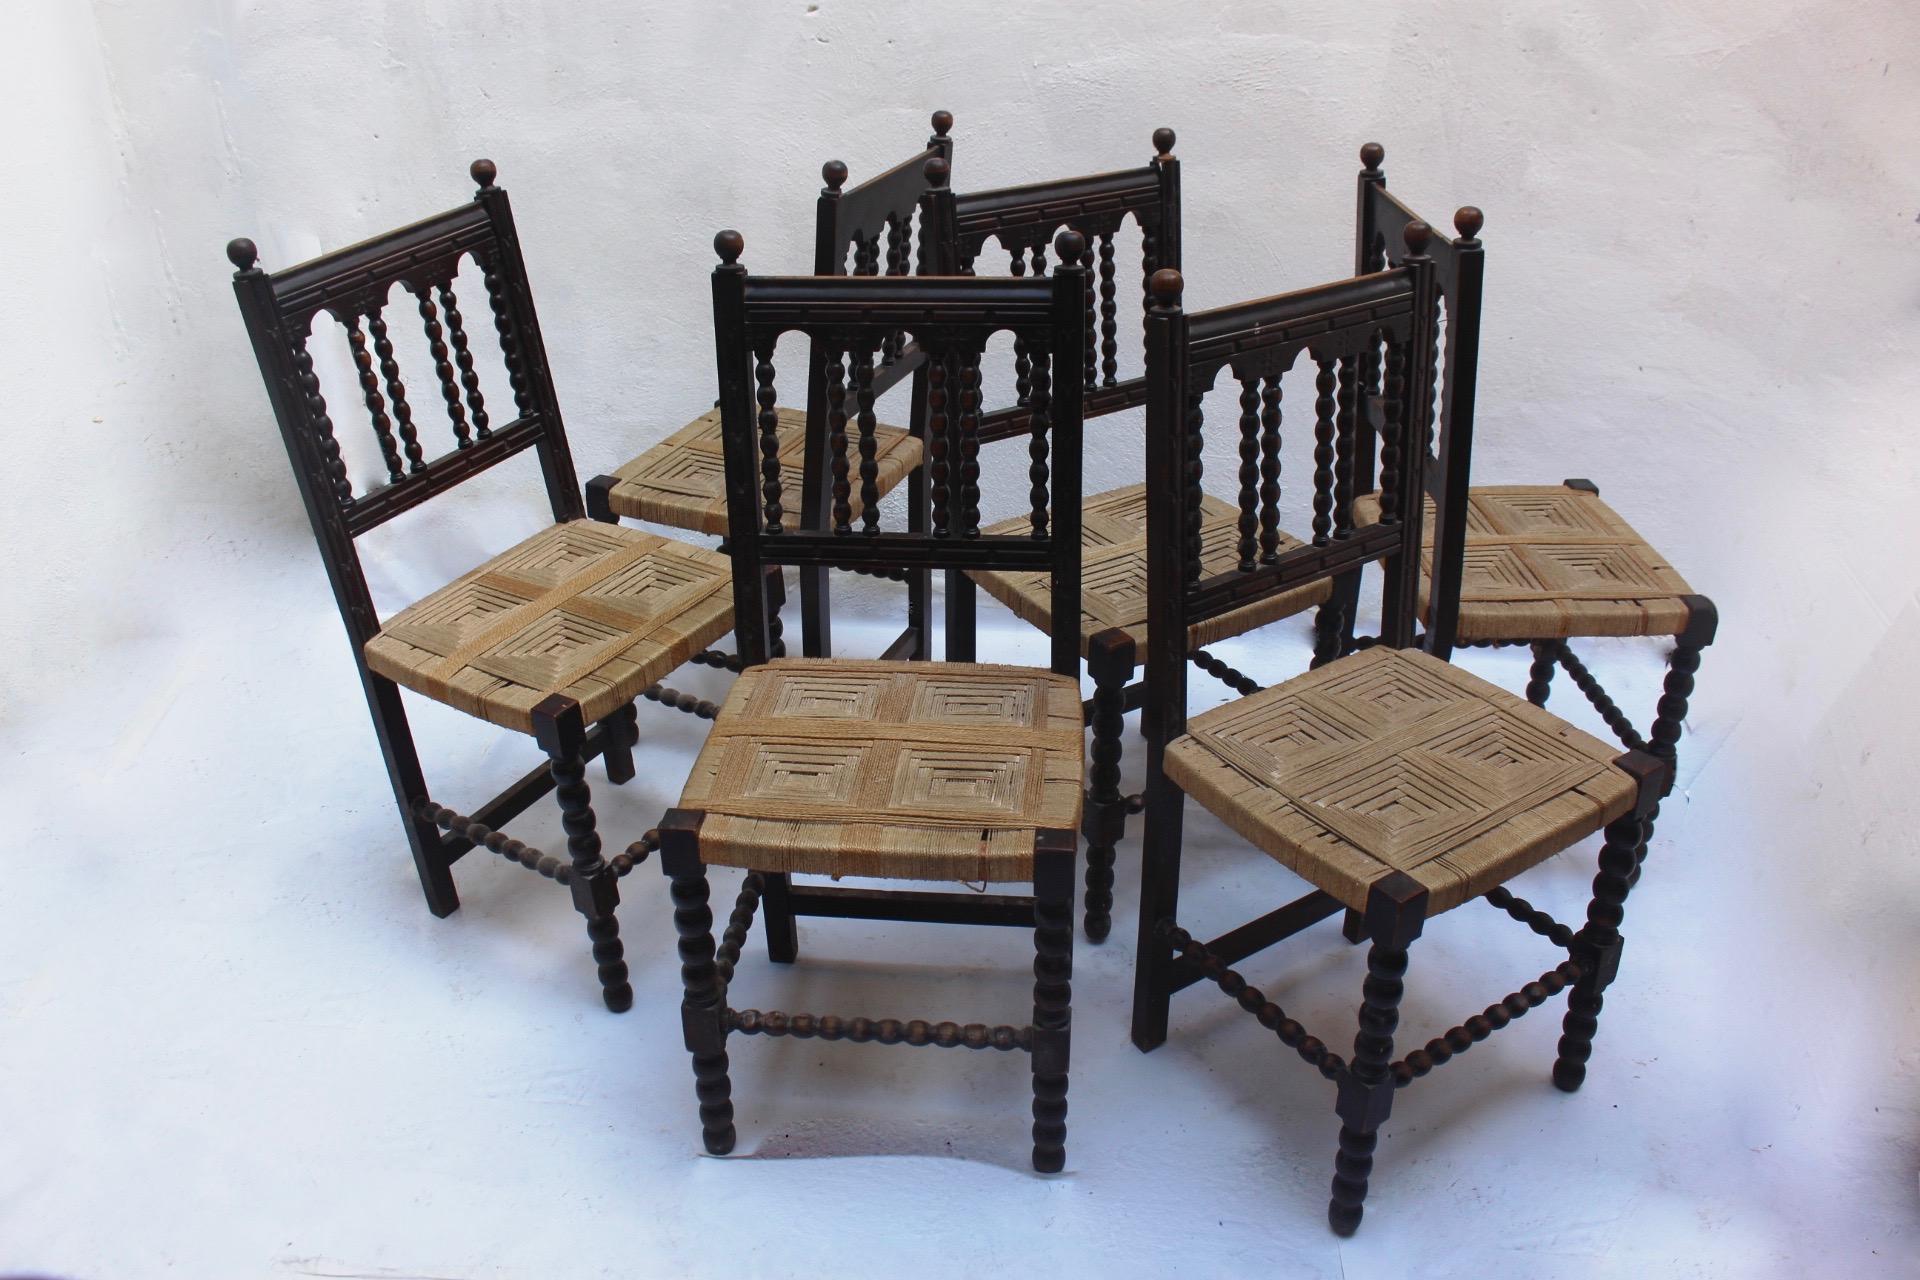 Hand-Carved Baroque Revival Wood and Woven Dining Chair Made in Spain, 19th Century